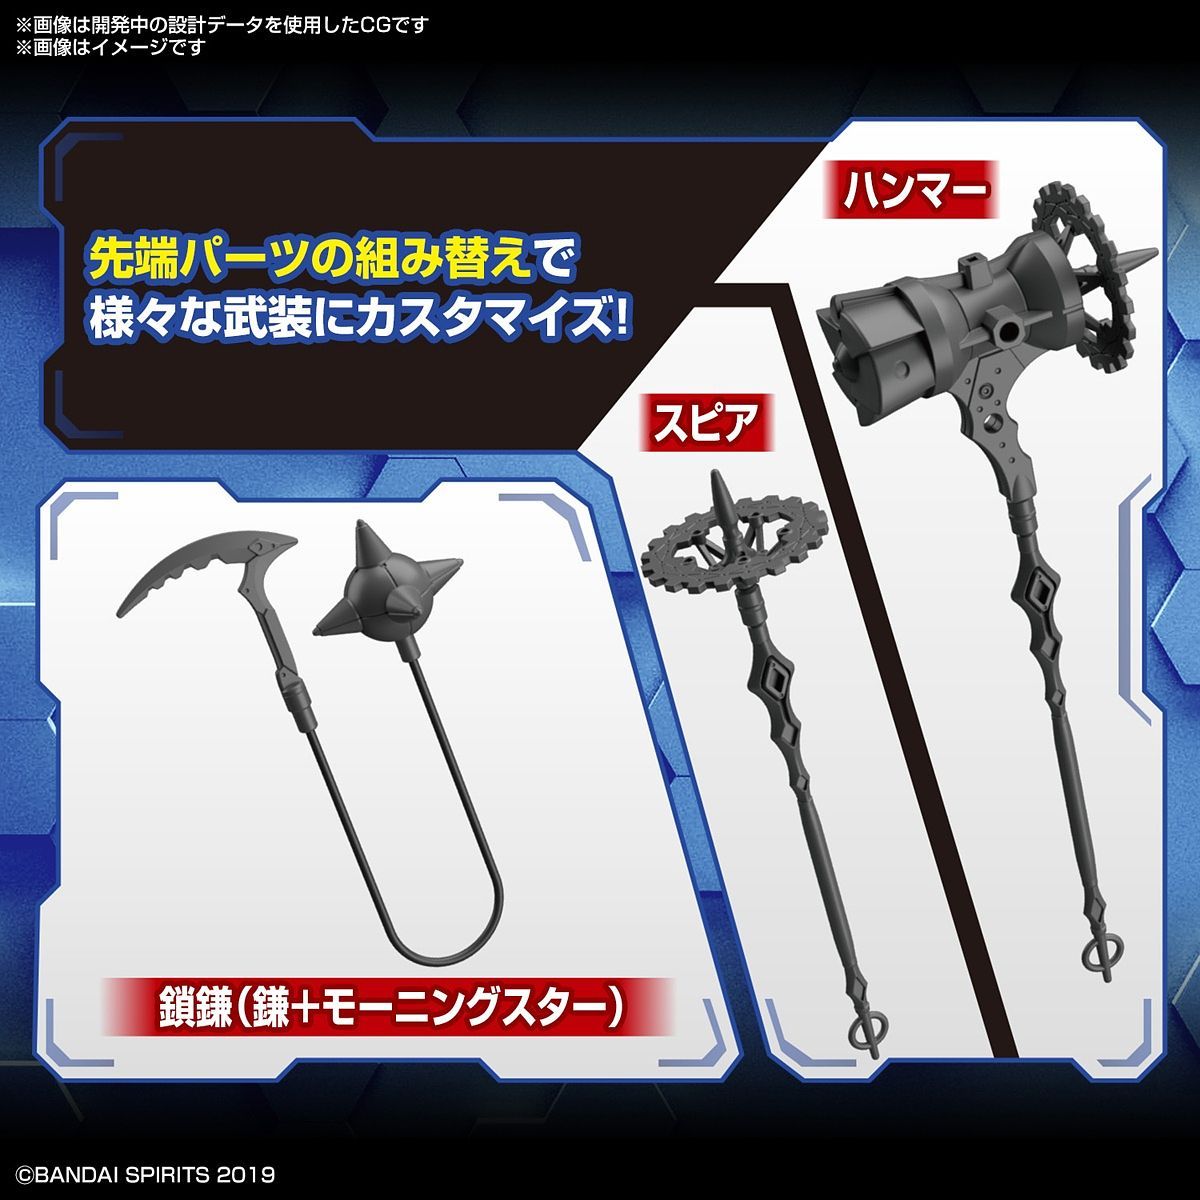 [PREORDER] CUSTOMIZE WEAPONS (FANTASY WEAPON)